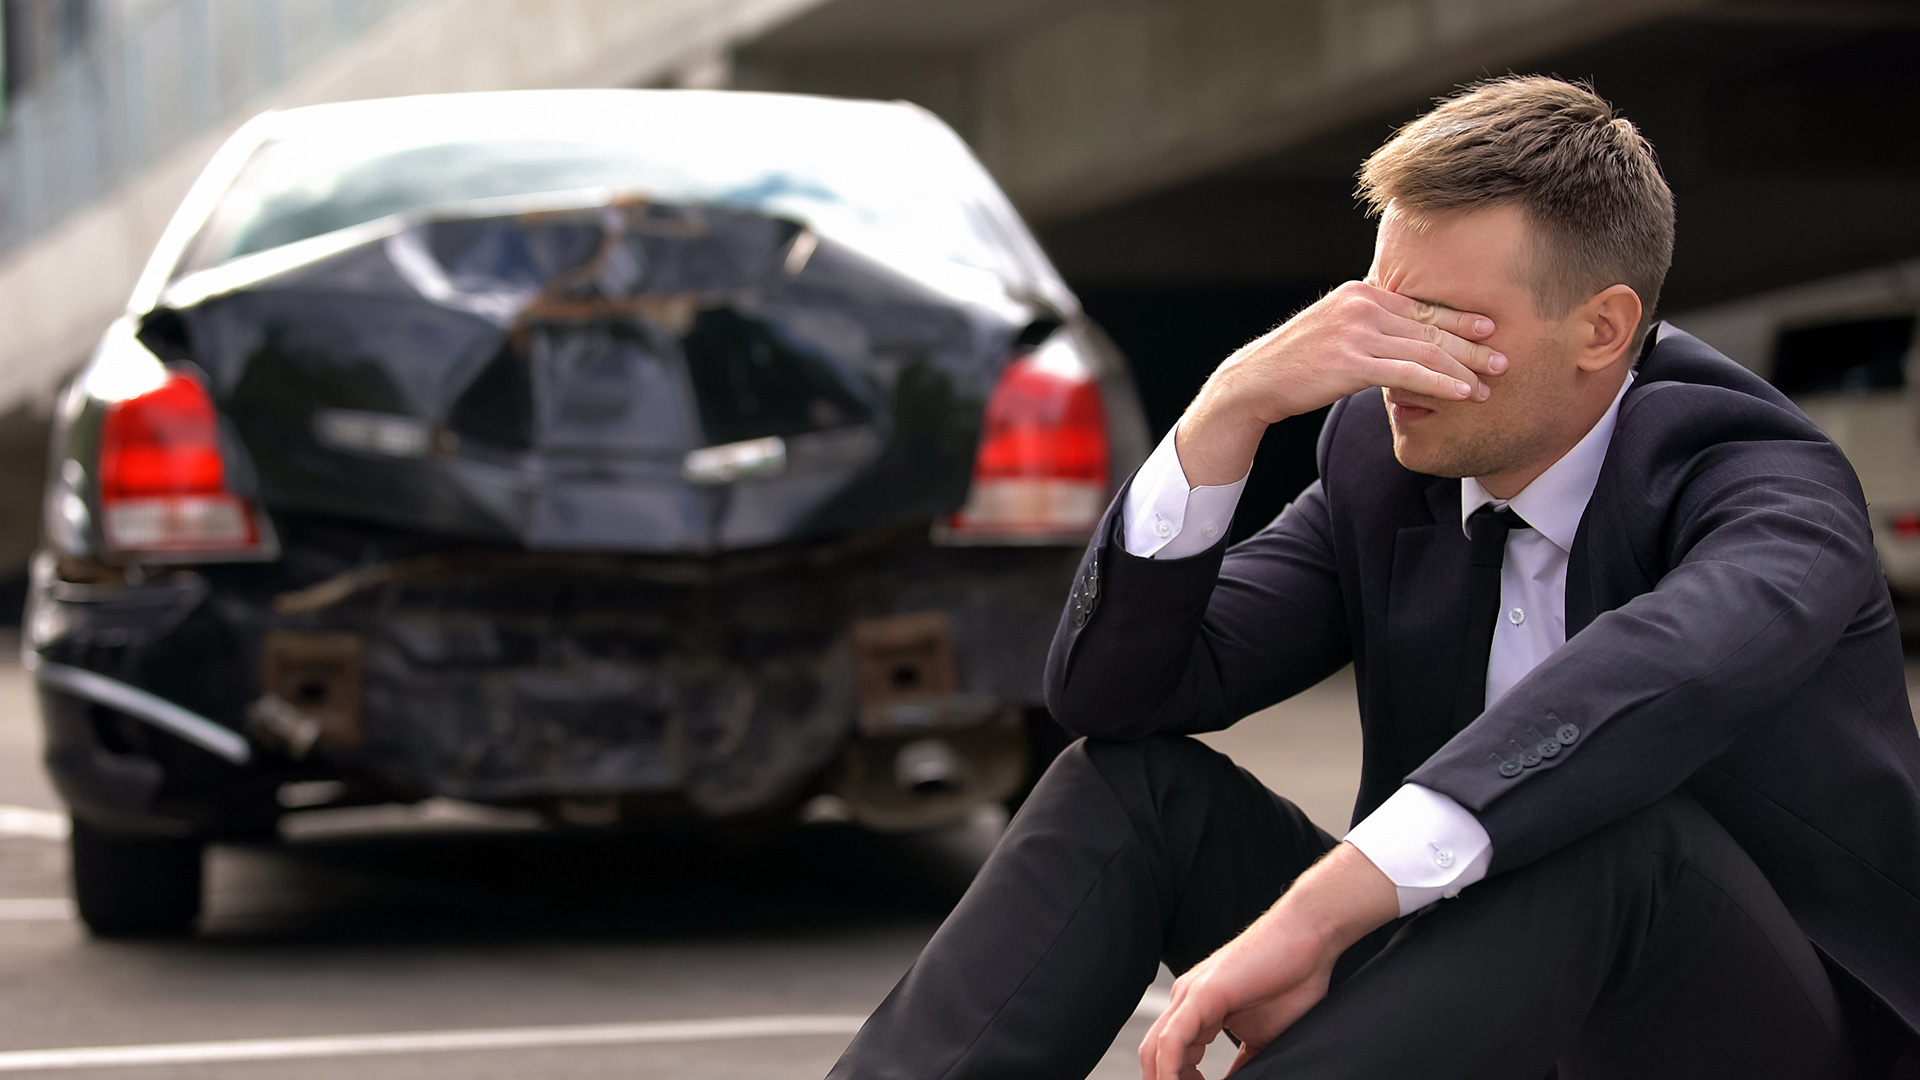 Car Accident Injury in California Statute of Limitations